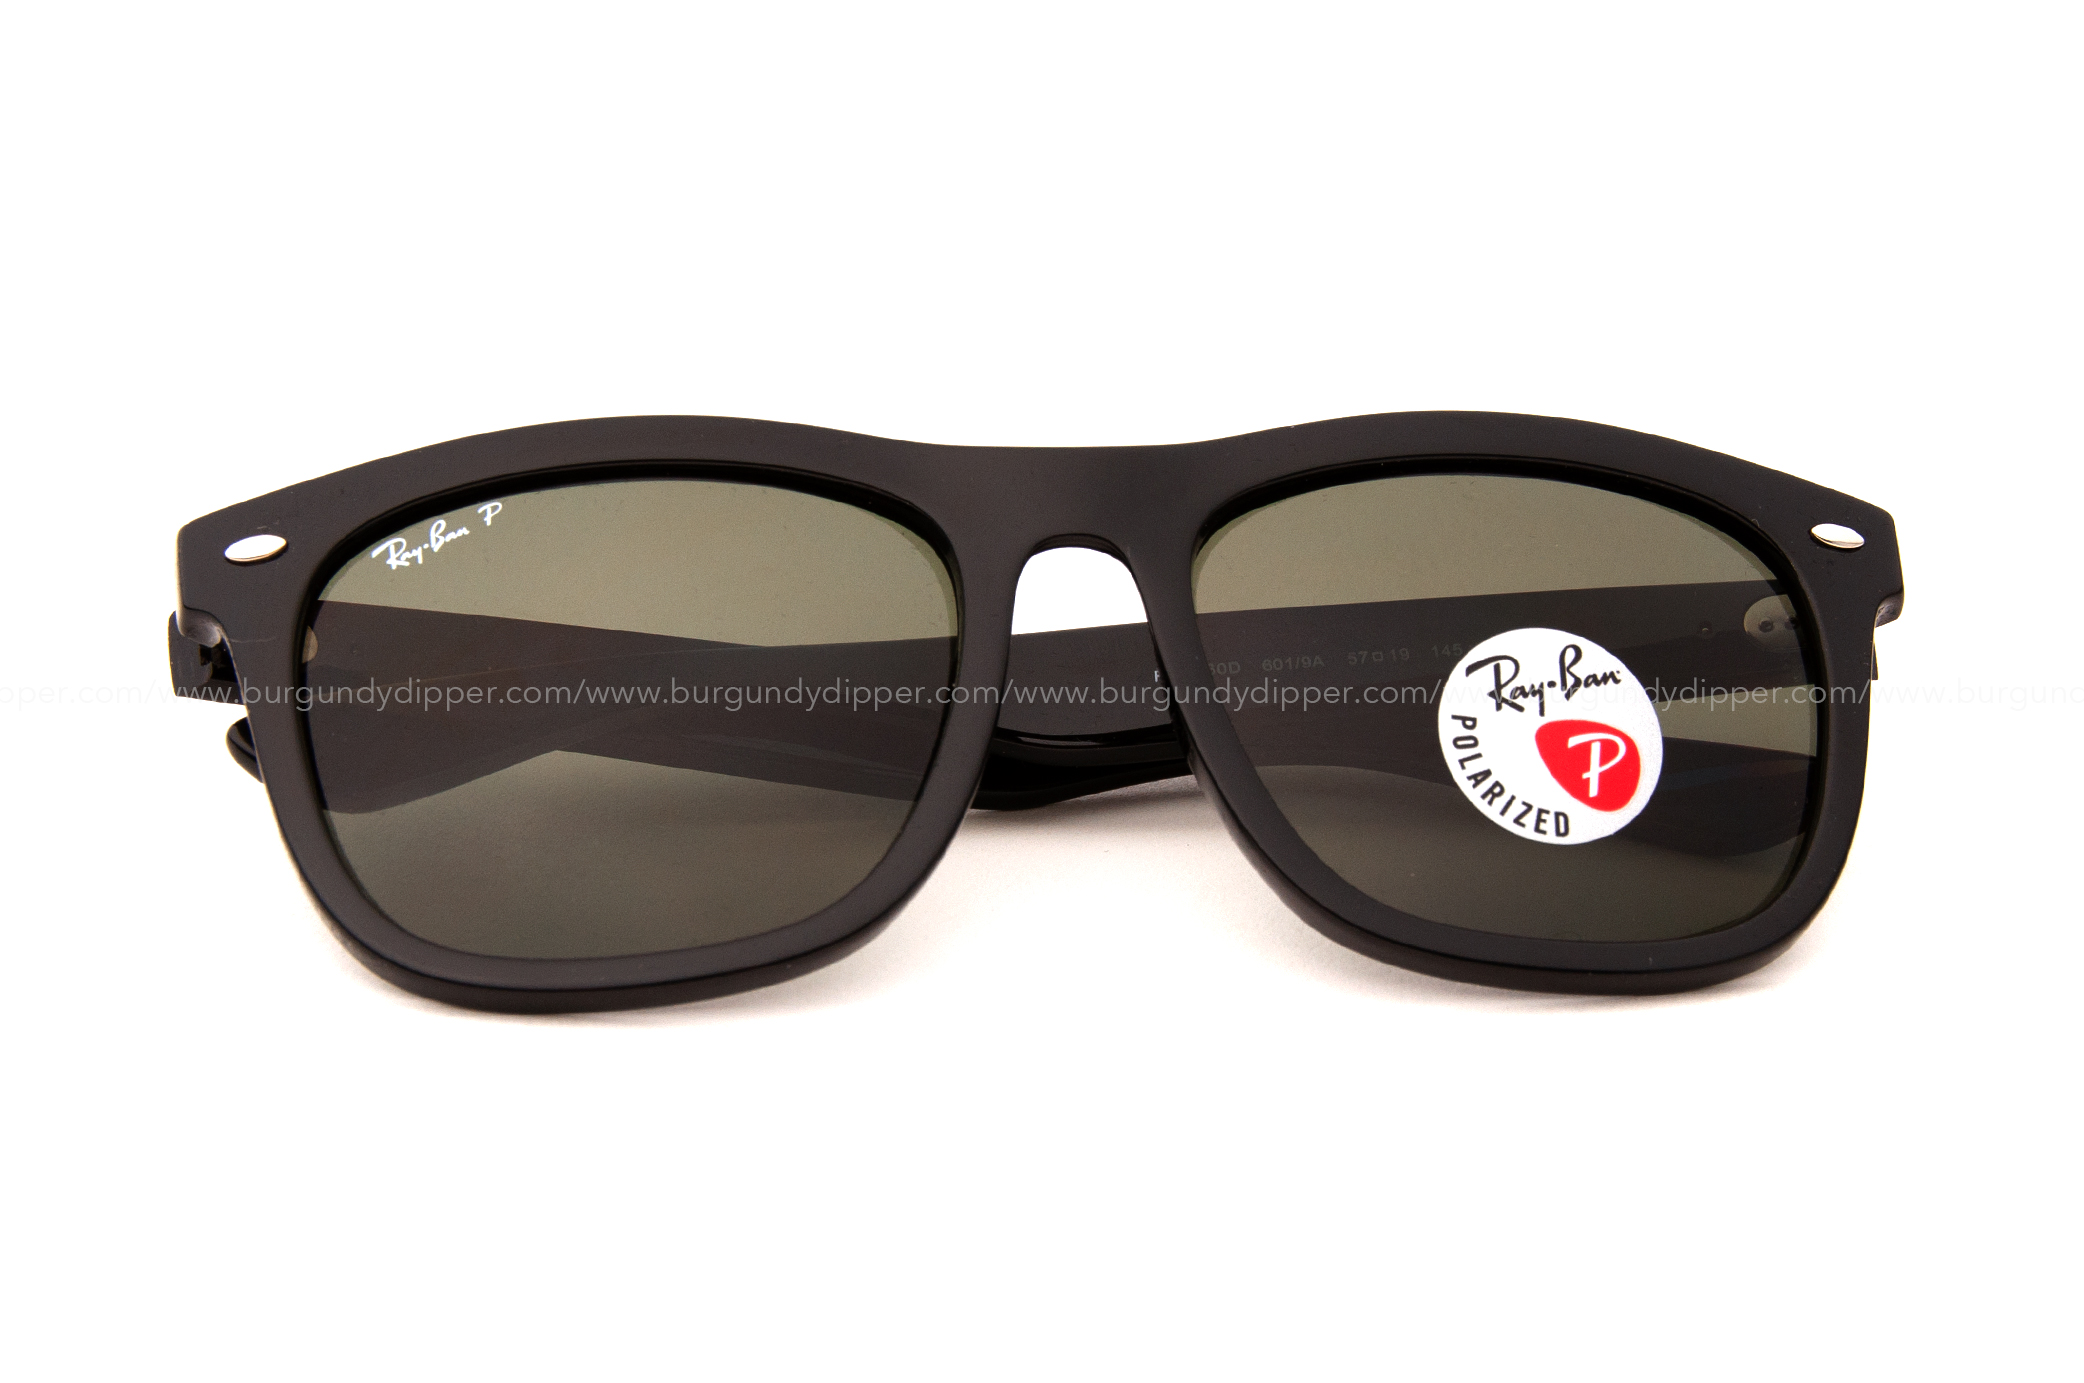 Ray-Ban RB4260D 601/9A SIZE 57 MM. – Burgundy Dipper